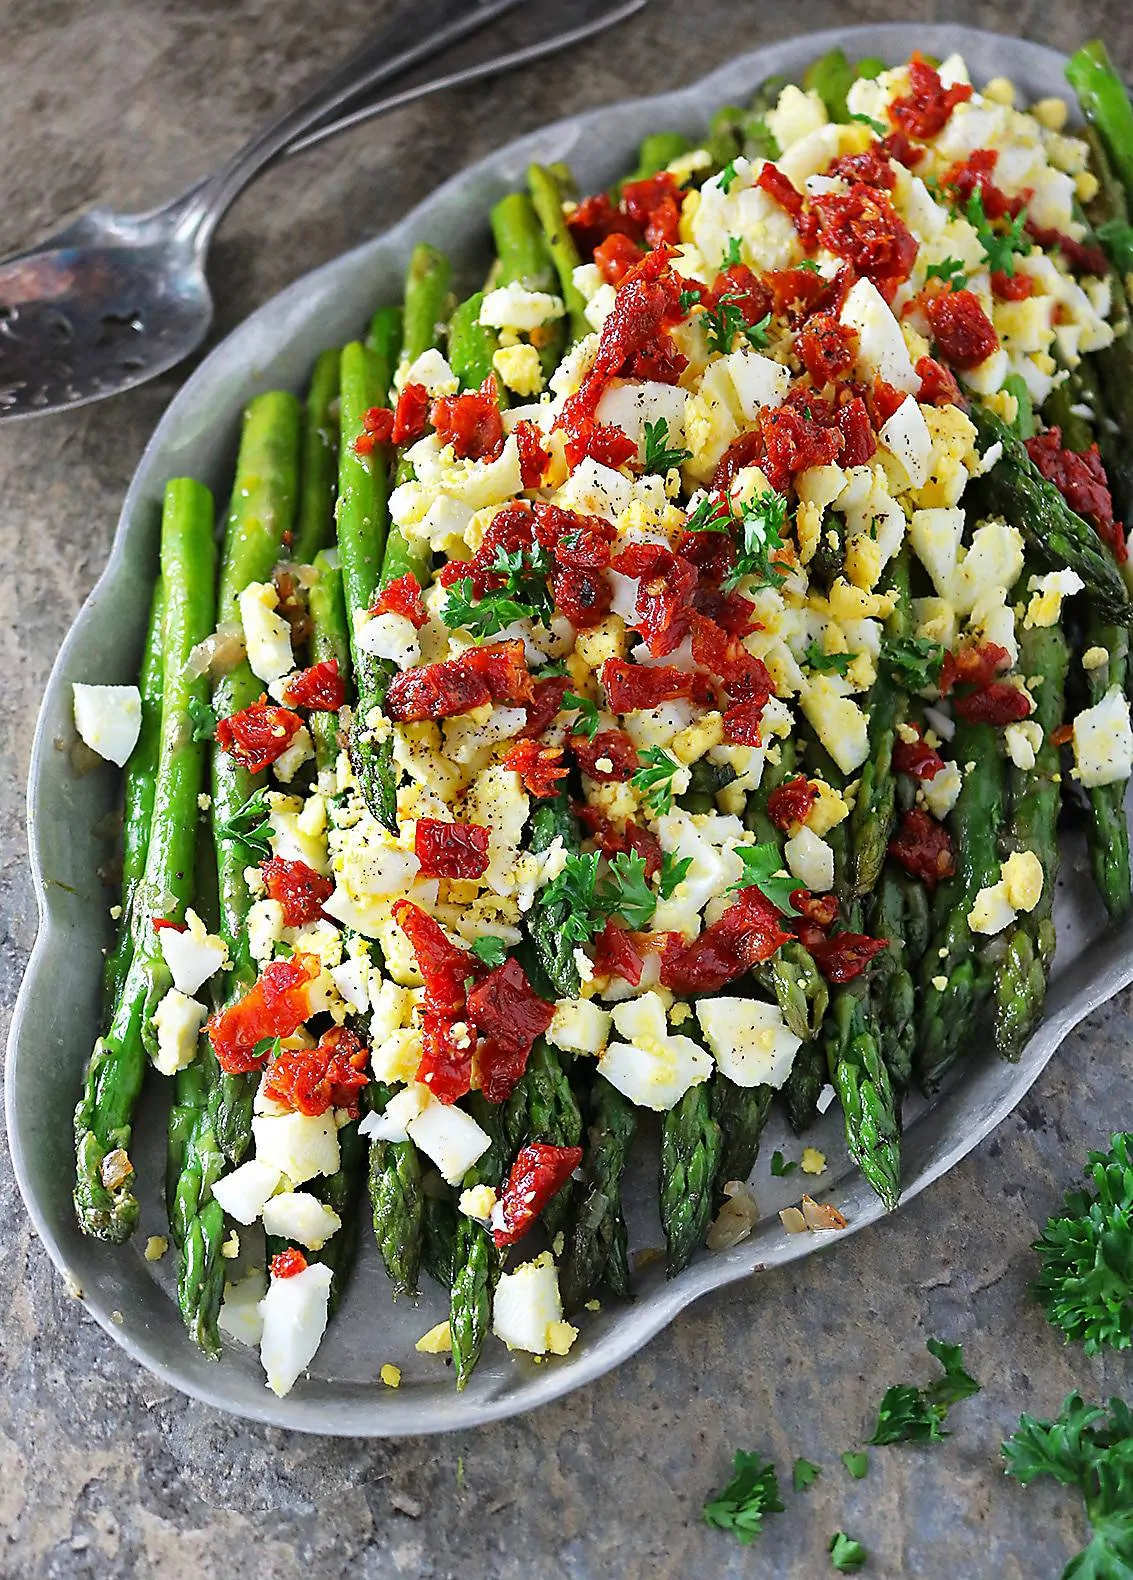 Sauteed Asparagus topped with boiled egg and sundried tomatoes on a silver platter